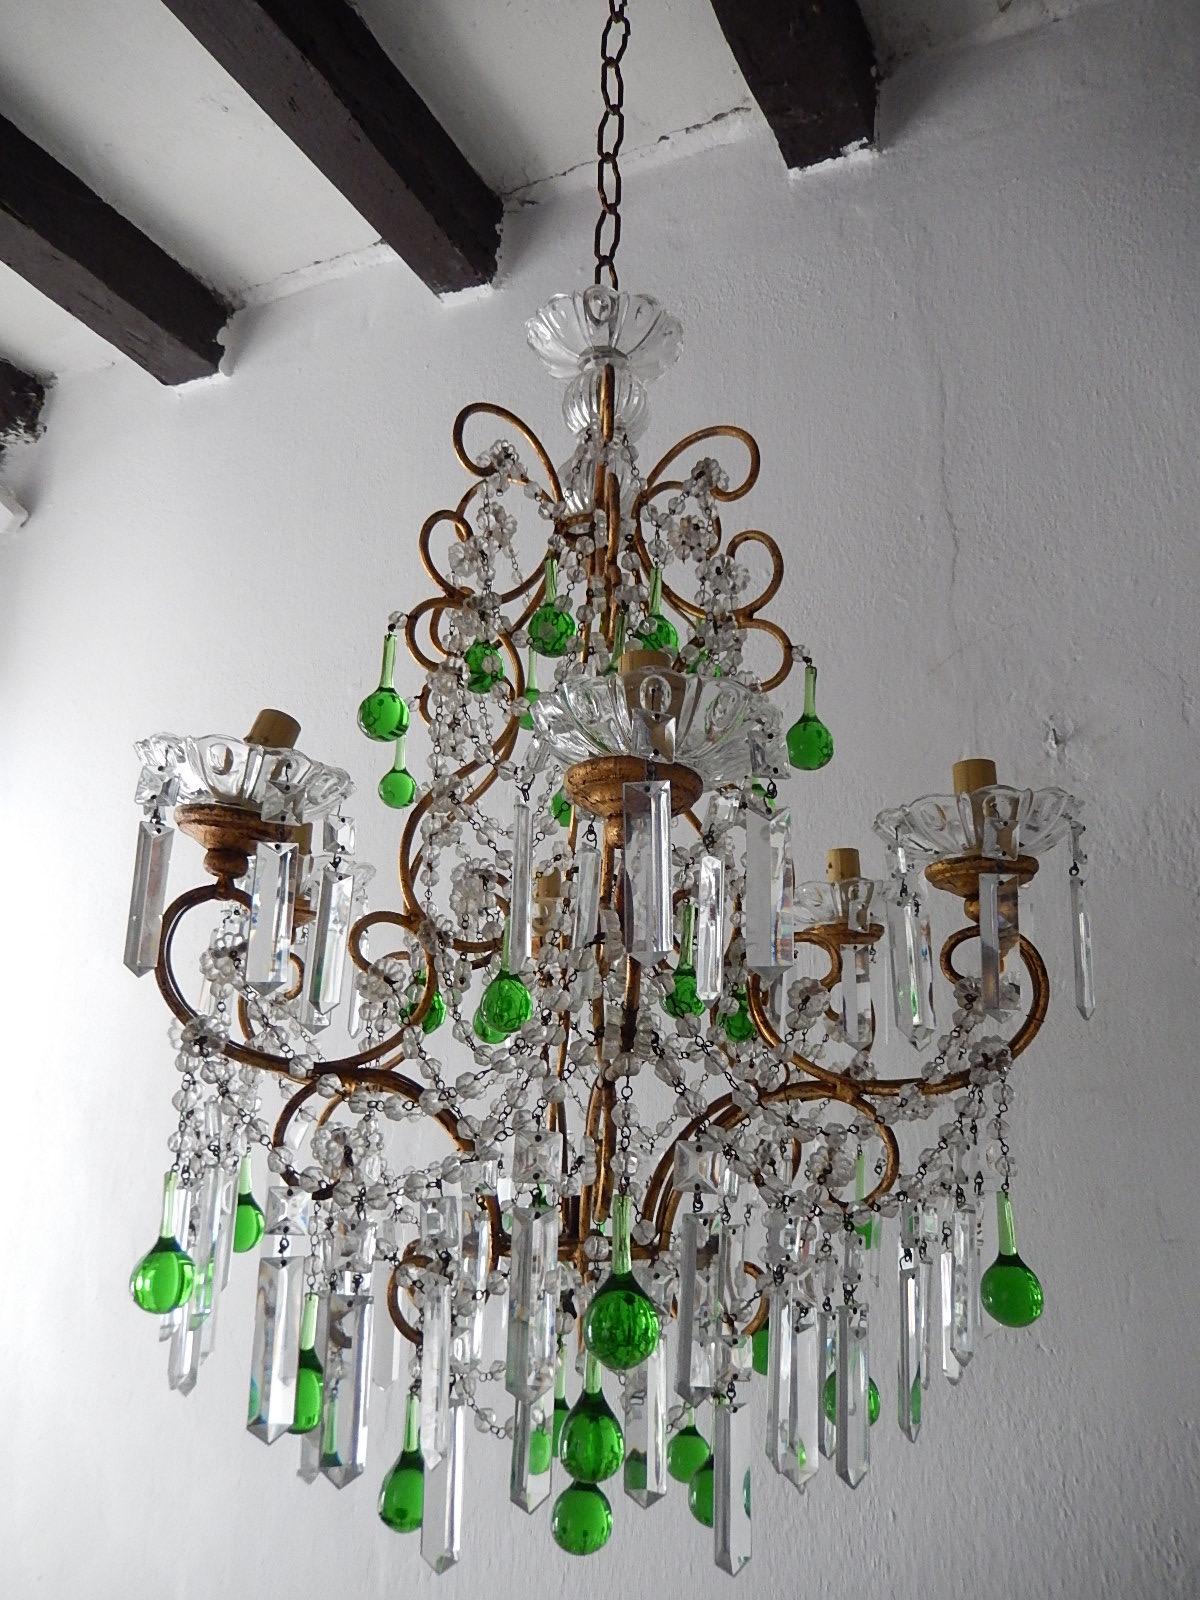 Housing 6-light, bobeches in crystal, dripping with vintage rare shape crystals sitting on giltwood posts. Swags of rock crystal beads, crystal prisms and rare green Murano drops. Adding another 10